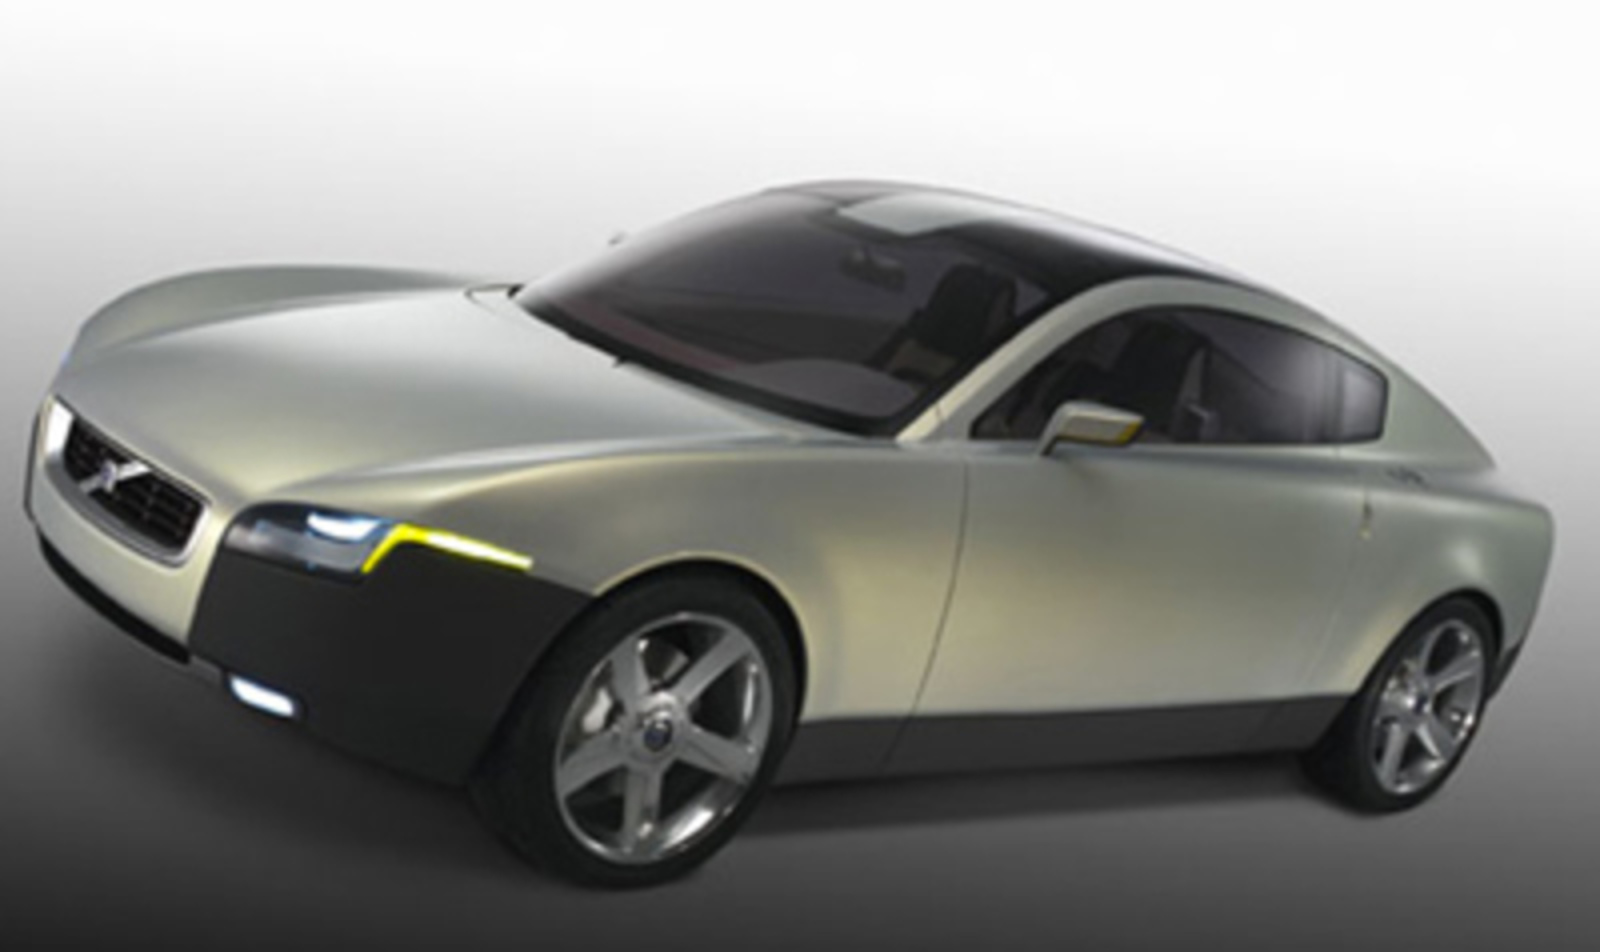 Image Gallery: Concept Cars. Image Gallery: Concept Cars The Volvo Your